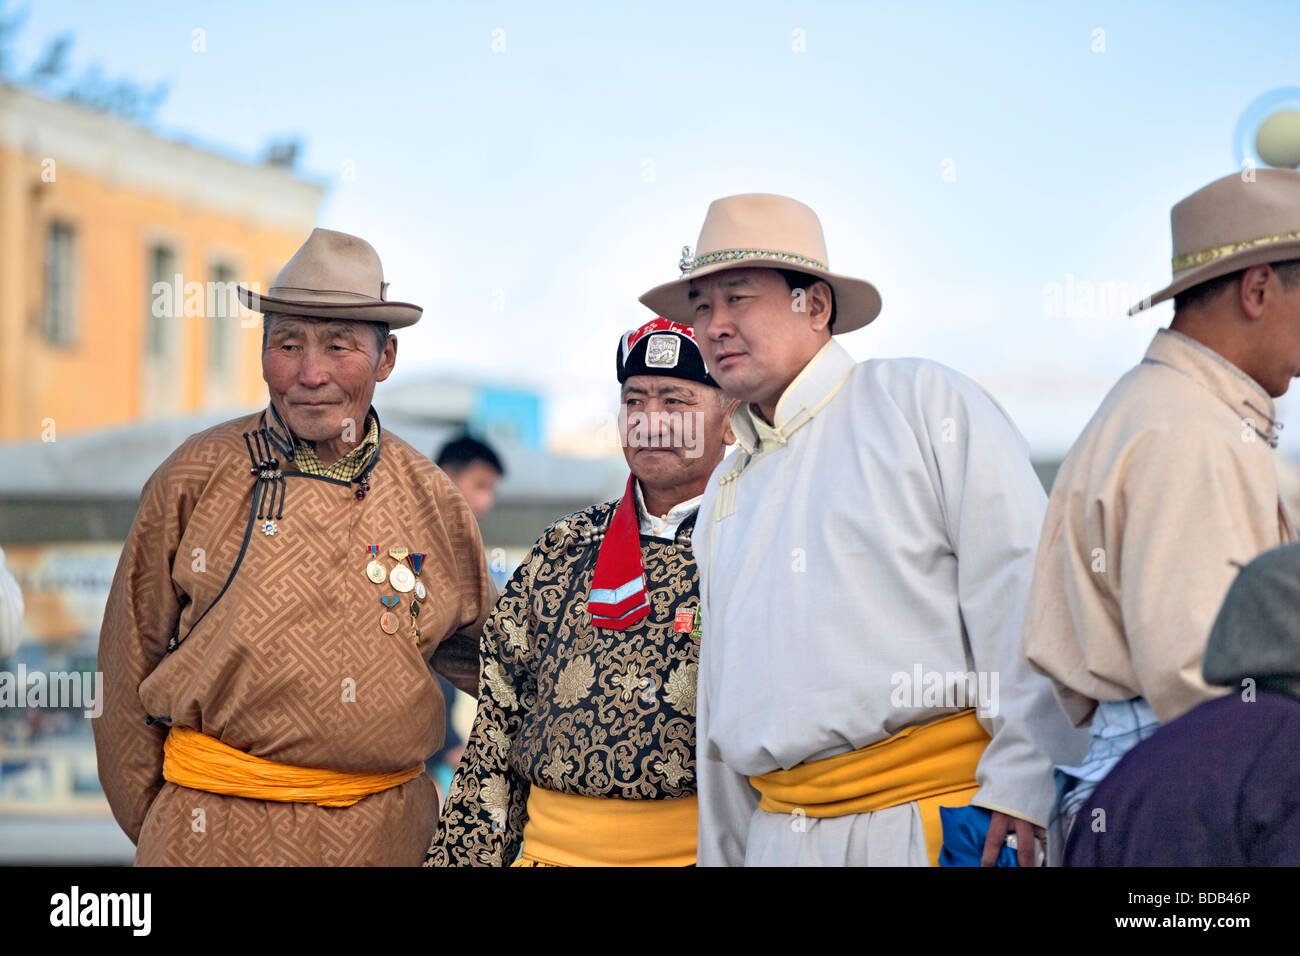 Mongolian men dressed in their finery for a wedding, Ulaan Baatar, Mongolia Stock Photo